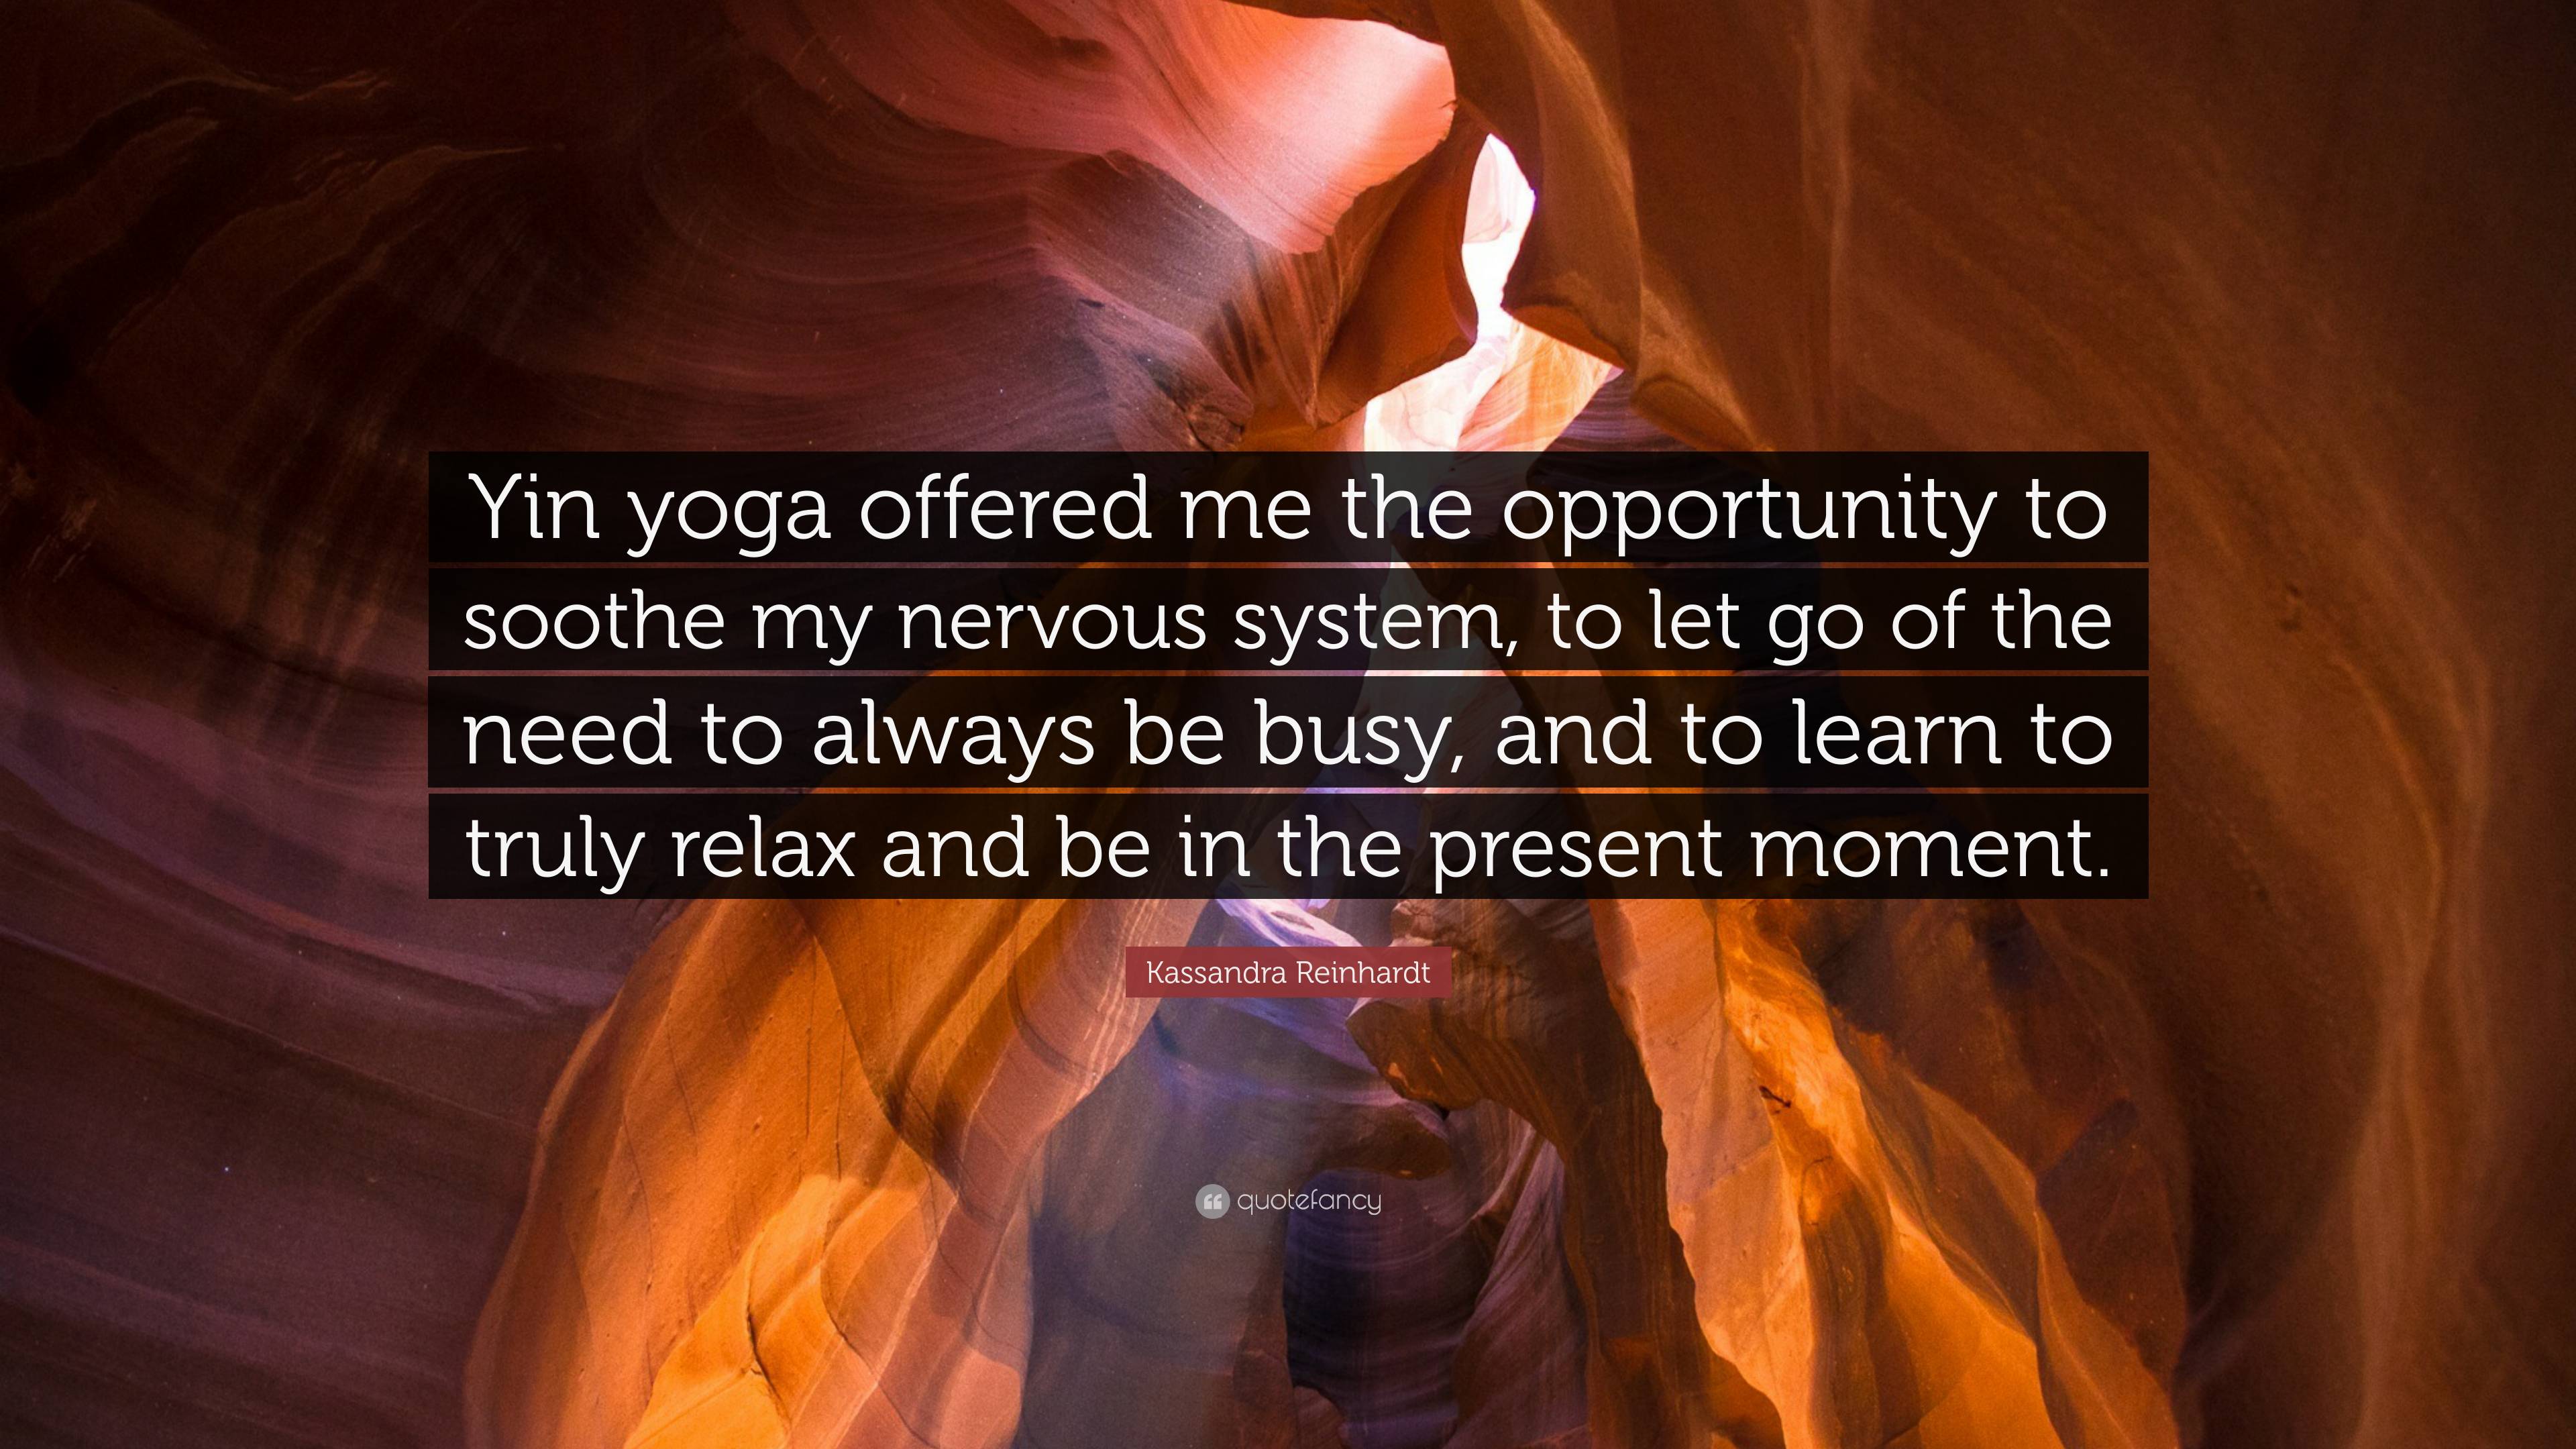 Kassandra Reinhardt Quote: “Yin yoga offered me the opportunity to soothe  my nervous system, to let go of the need to always be busy, and to learn t ”